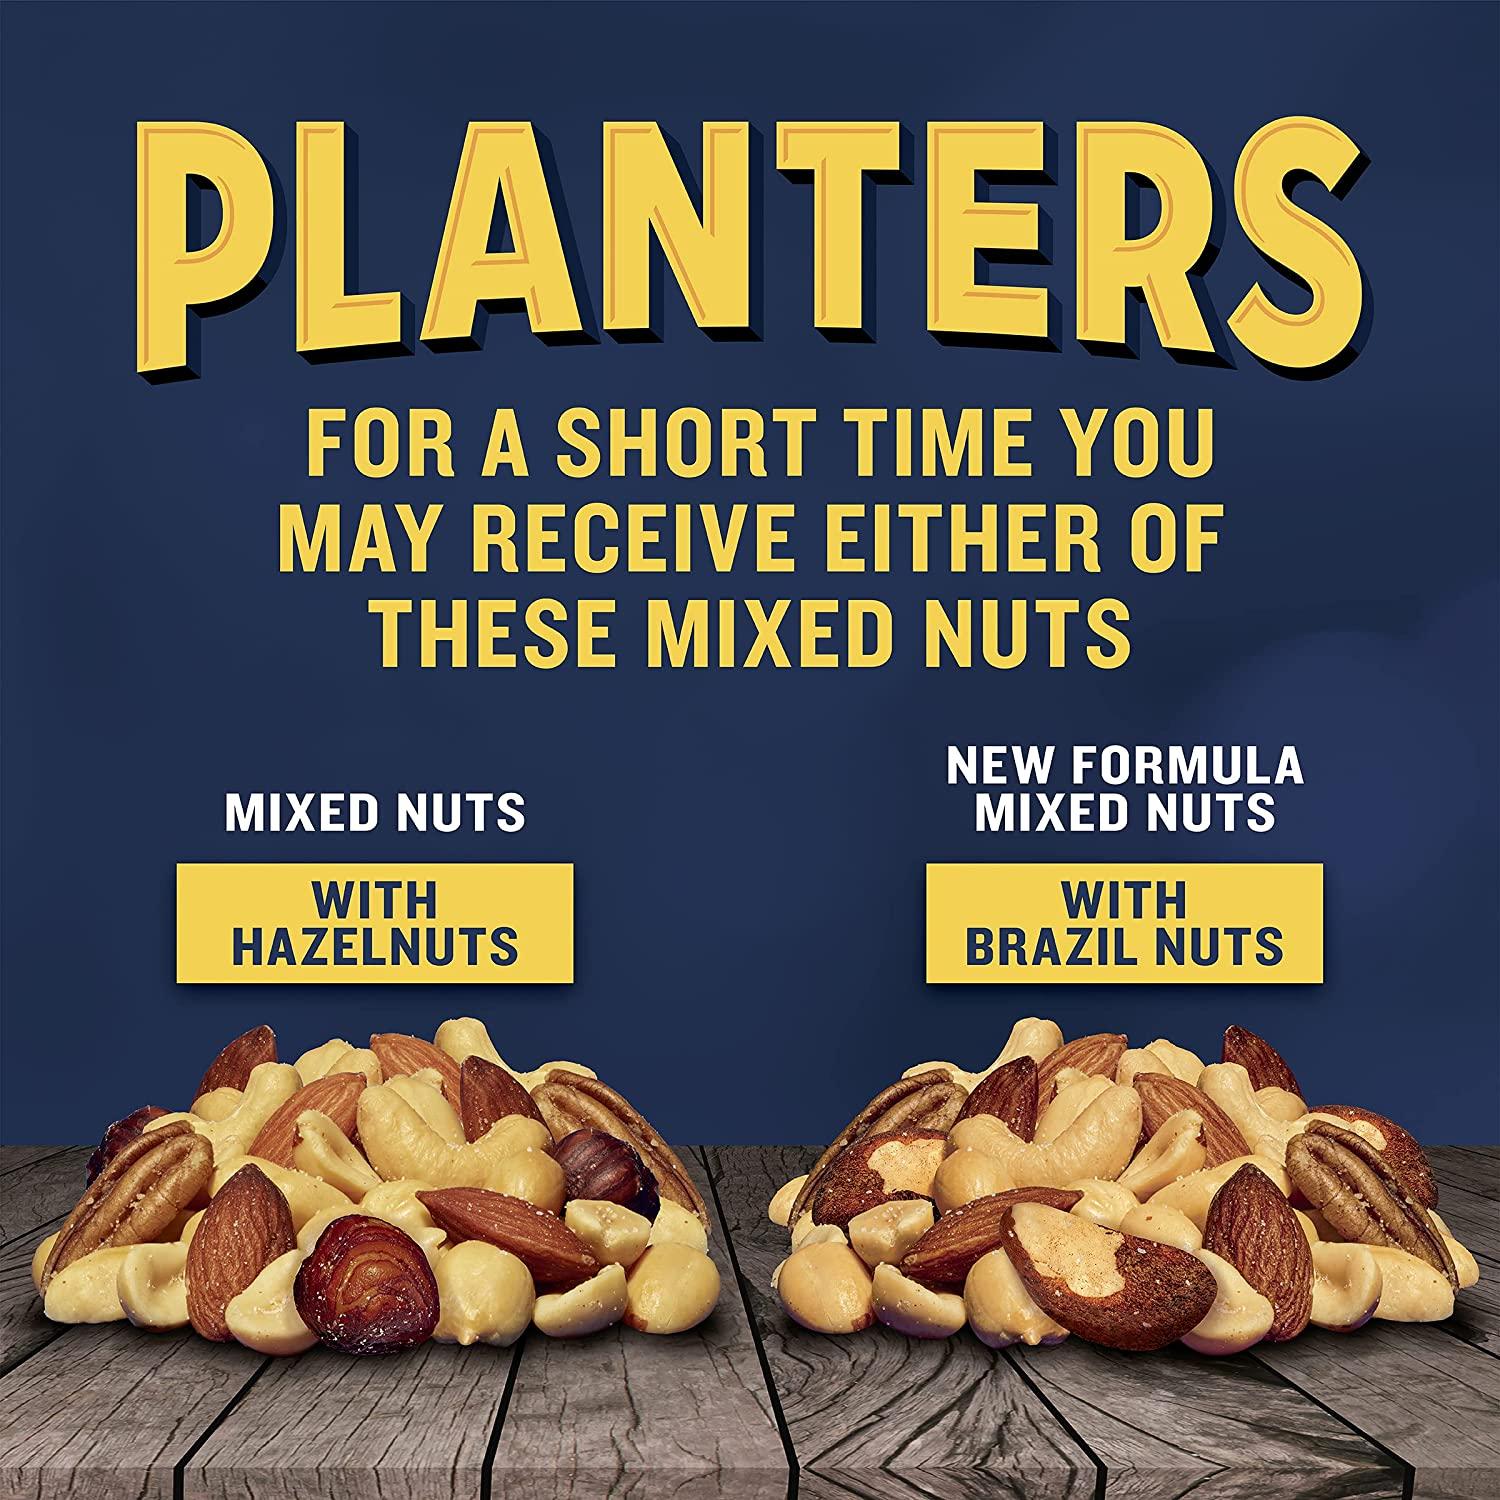 PLANTERS Honey Roasted Mixed Nuts, Mixed Nuts